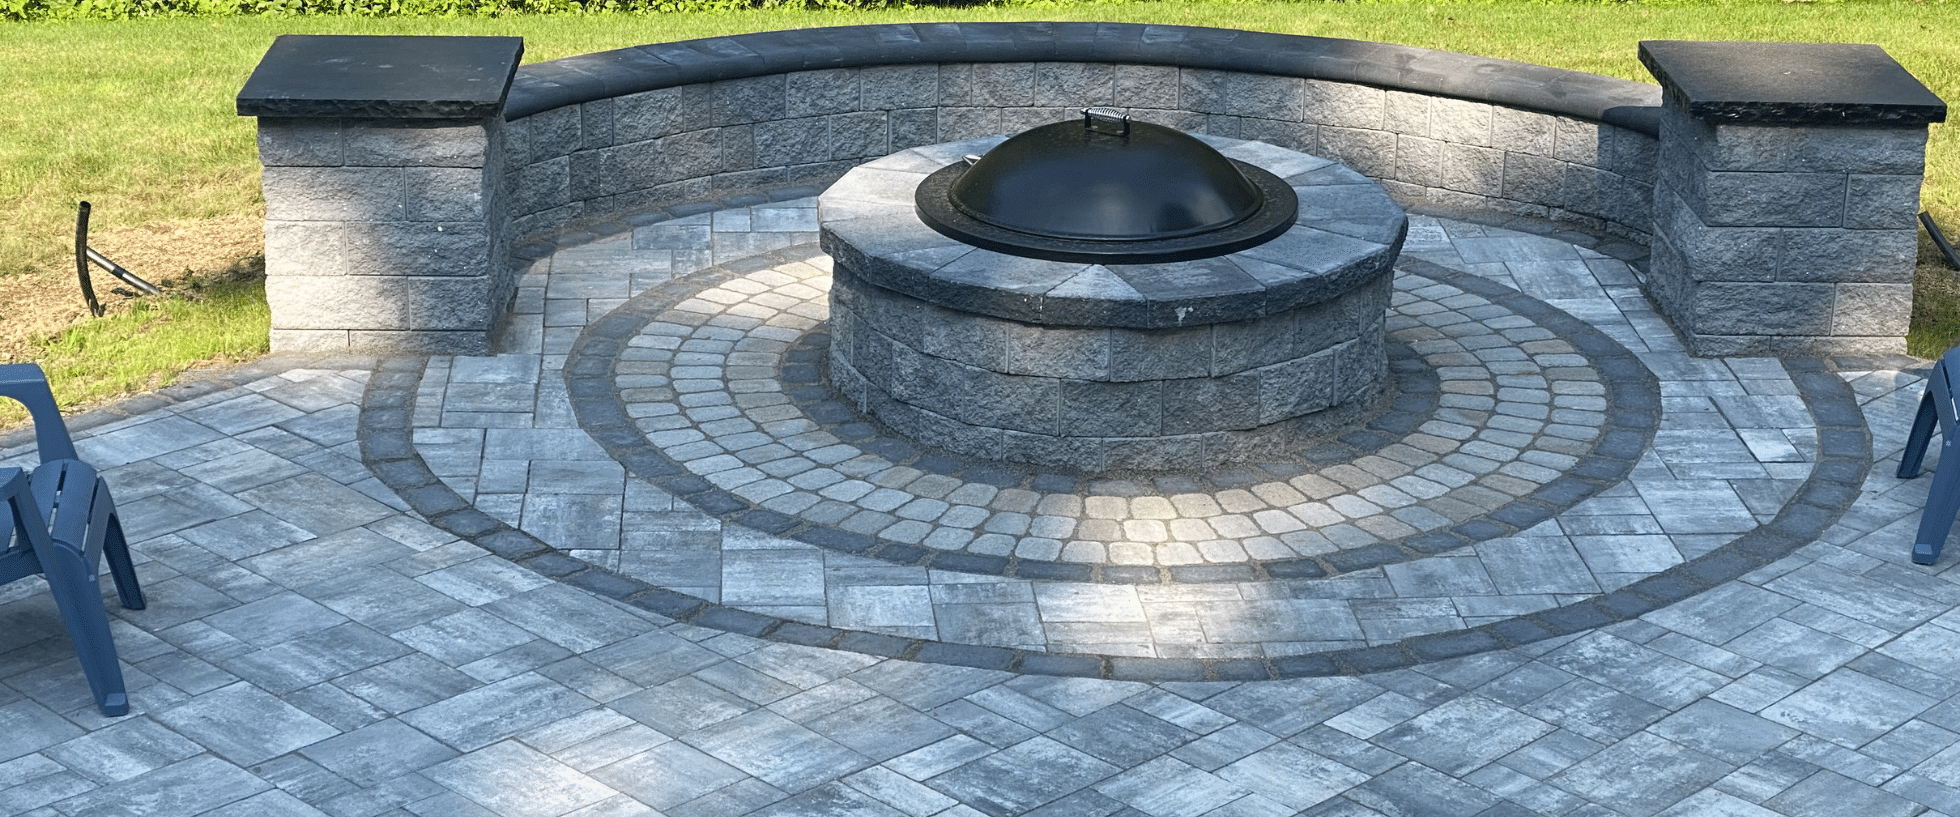 Massachusetts Patio Ideas: Creating a Relaxing Oasis in Your Backyard with McLeod Landscaping